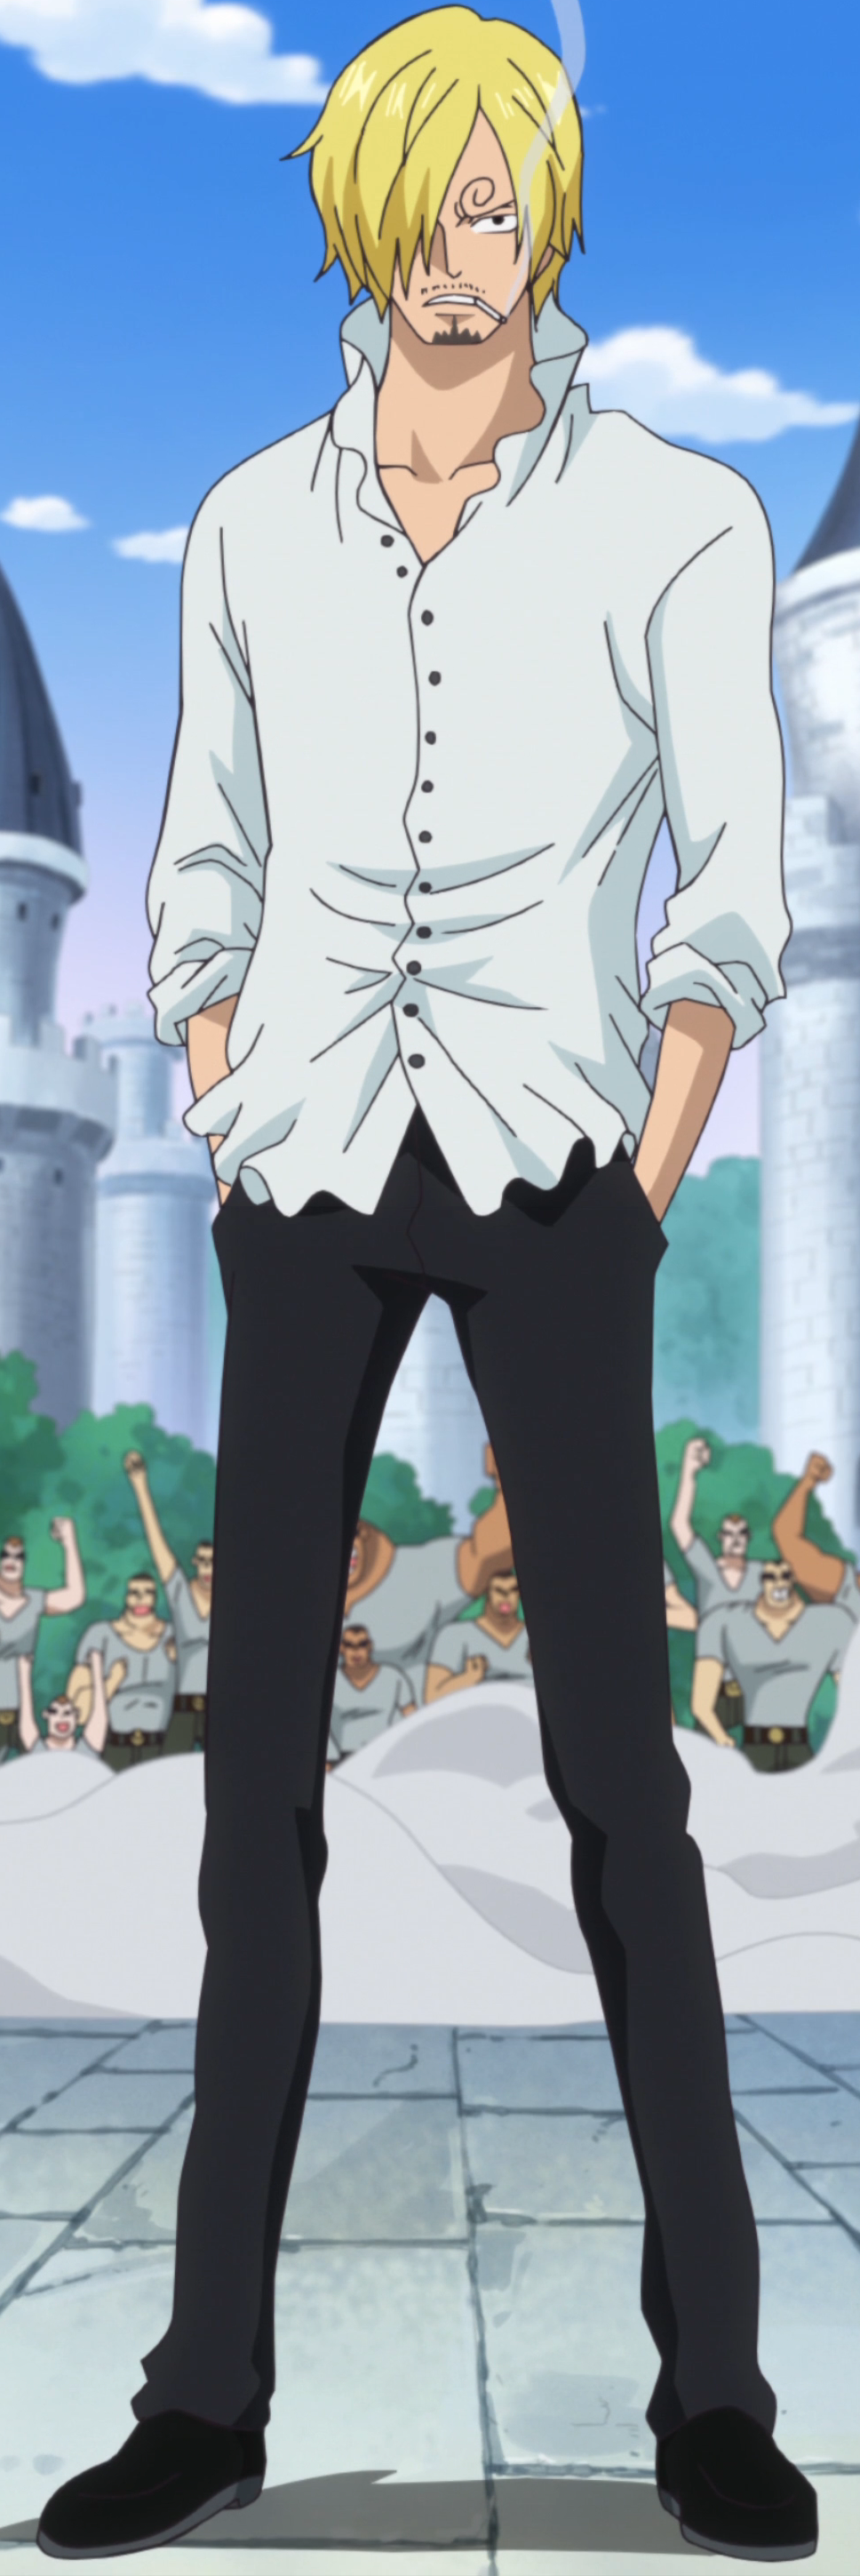 https://static.wikia.nocookie.net/onepiece/images/b/b6/Sanji_Anime_Post_Timeskip_Infobox.png/revision/latest?cb=20240122012744